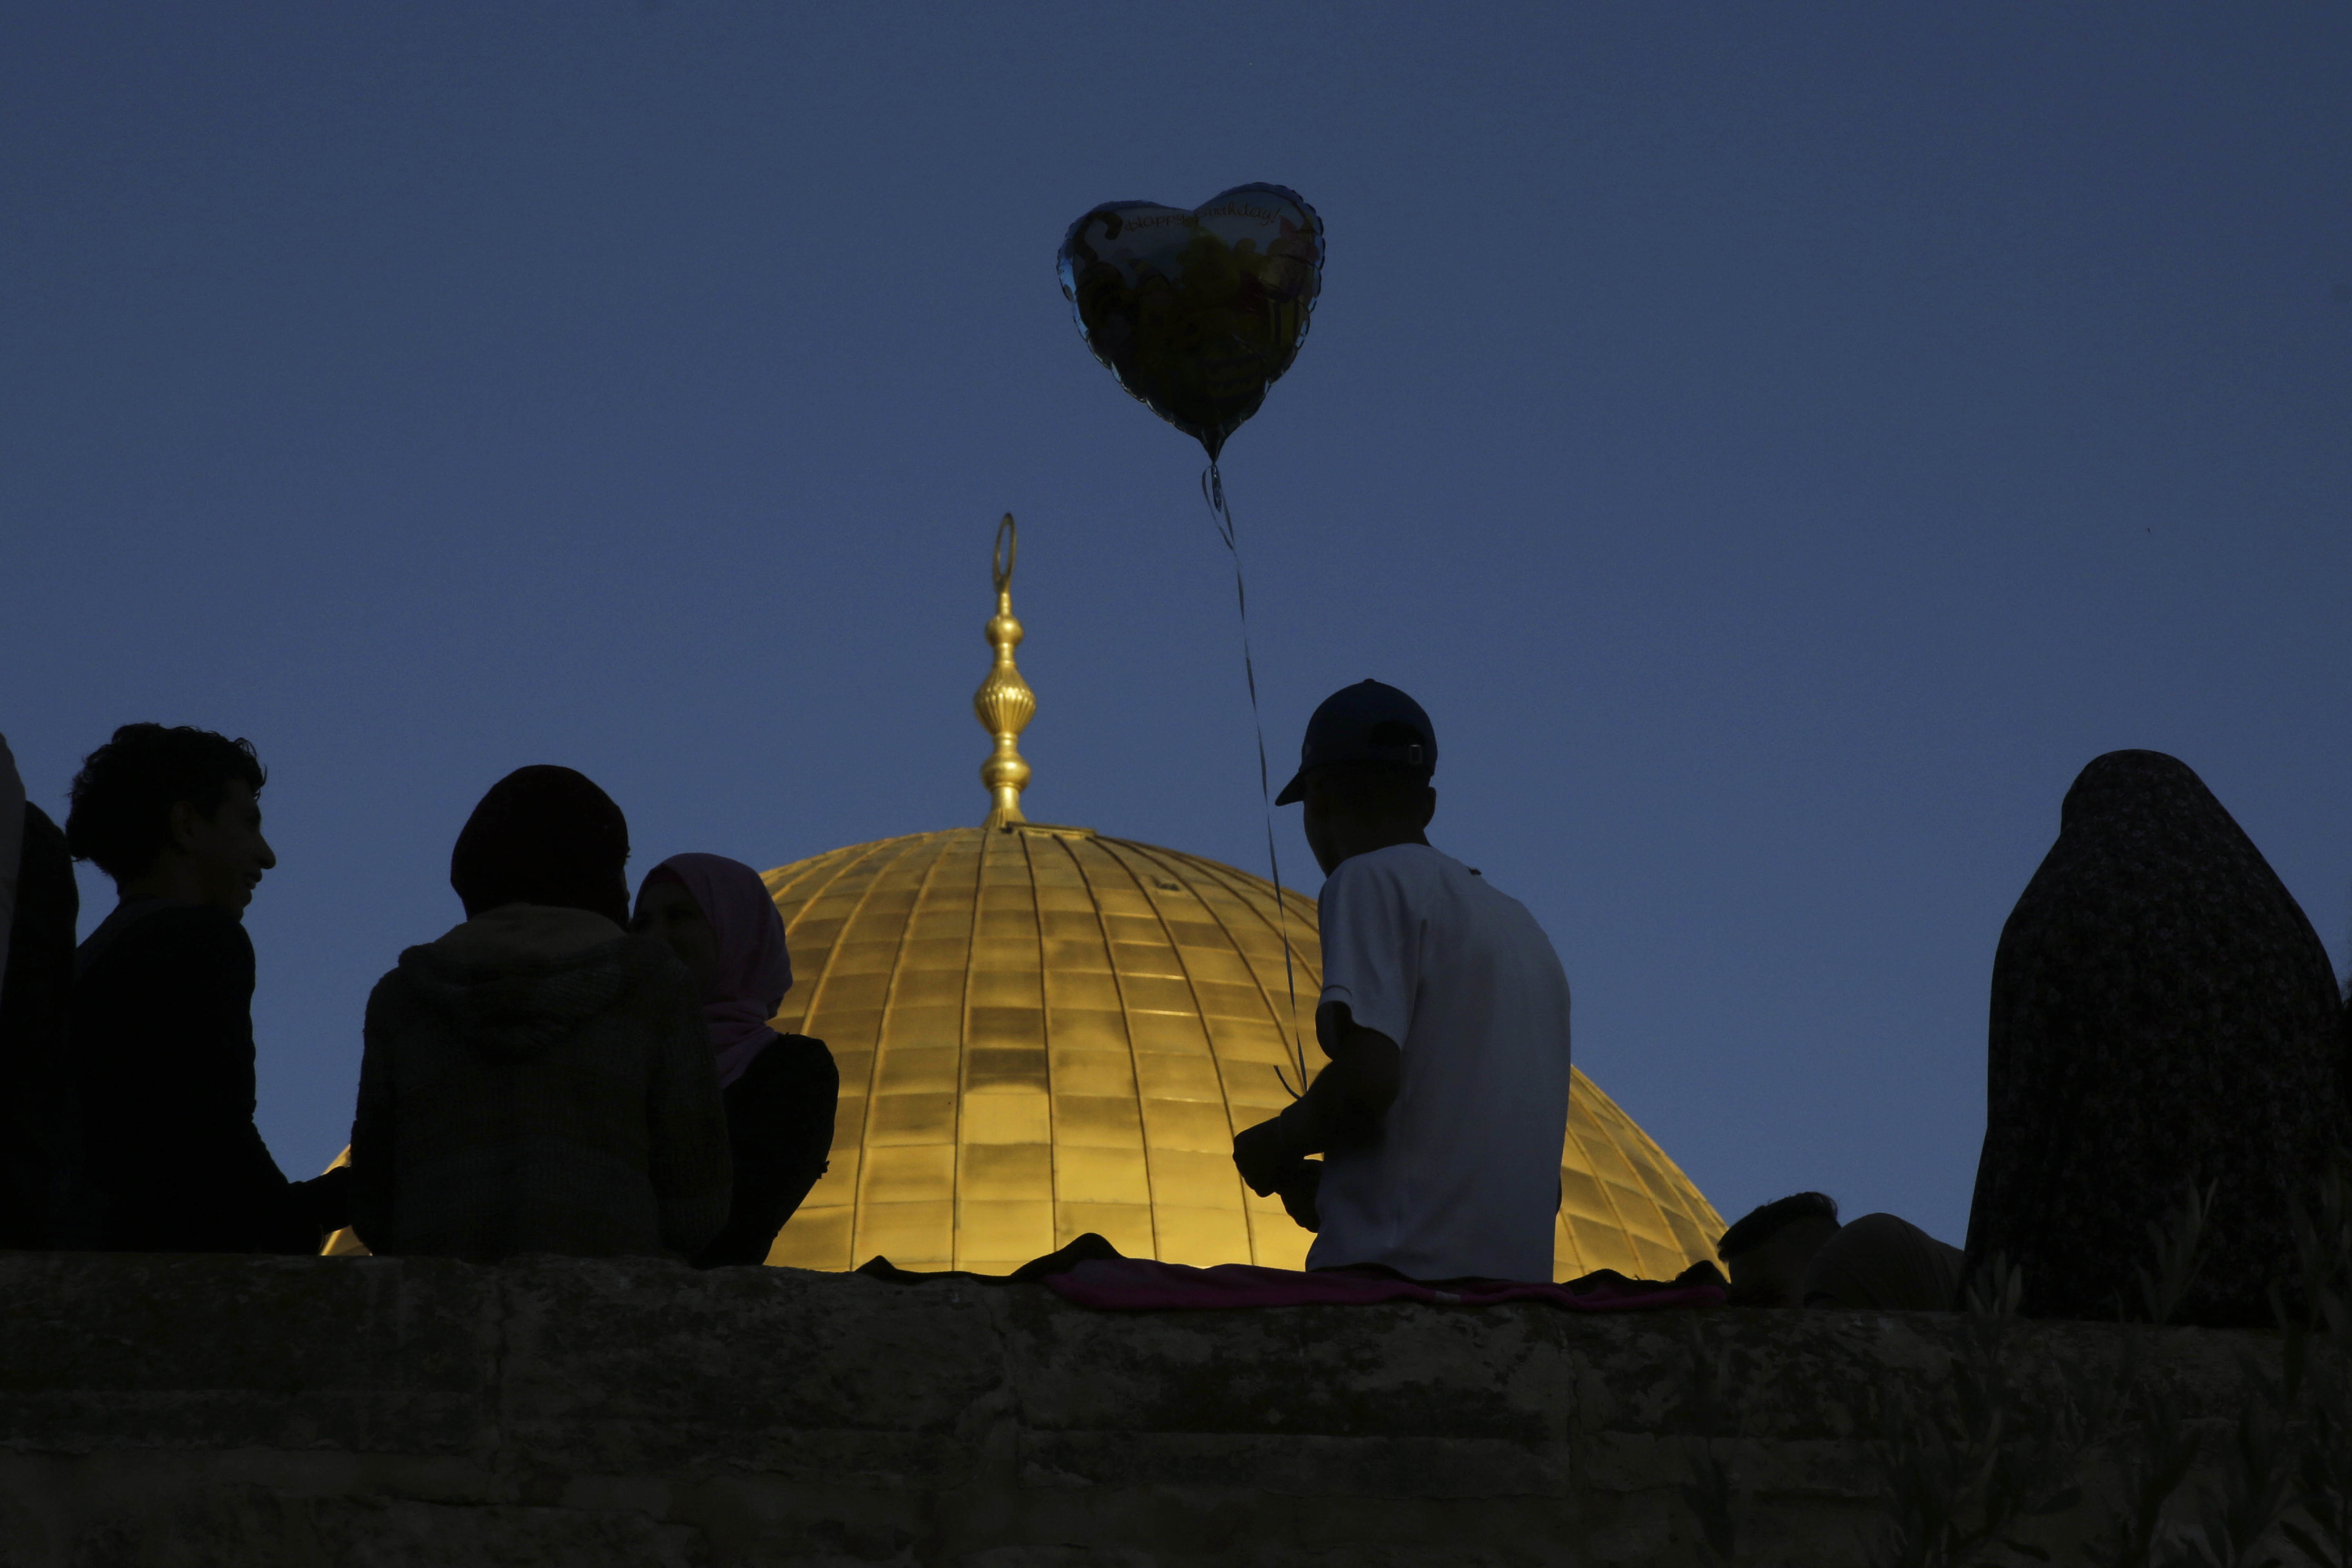 A Palestinian boy hold a balloon in front of the Dome of the Rock shrine in Jerusalem, Friday, June 15, 2018 during the traditional morning prayer of the Muslim holiday of Eid al-Fitr. (AP Photo/Mahmoud Illean)